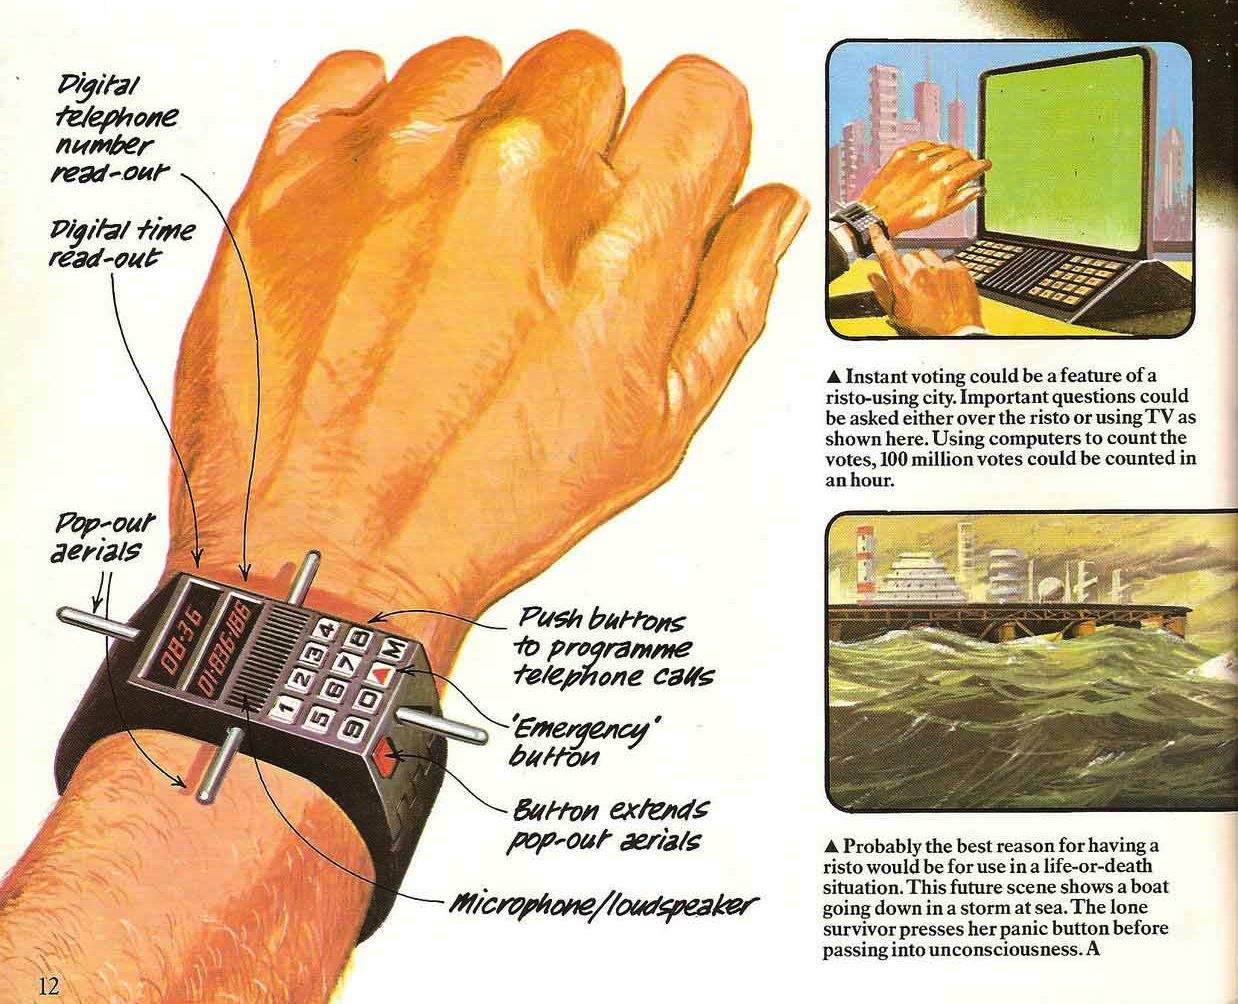 The Pulsar might have been the reality of digital watches around the time that Apple started, but what was predicted by the age’s futurists? The 1979 Usborne book Future Cities: Homes & Living Into the 21st Century describes the arrival of 